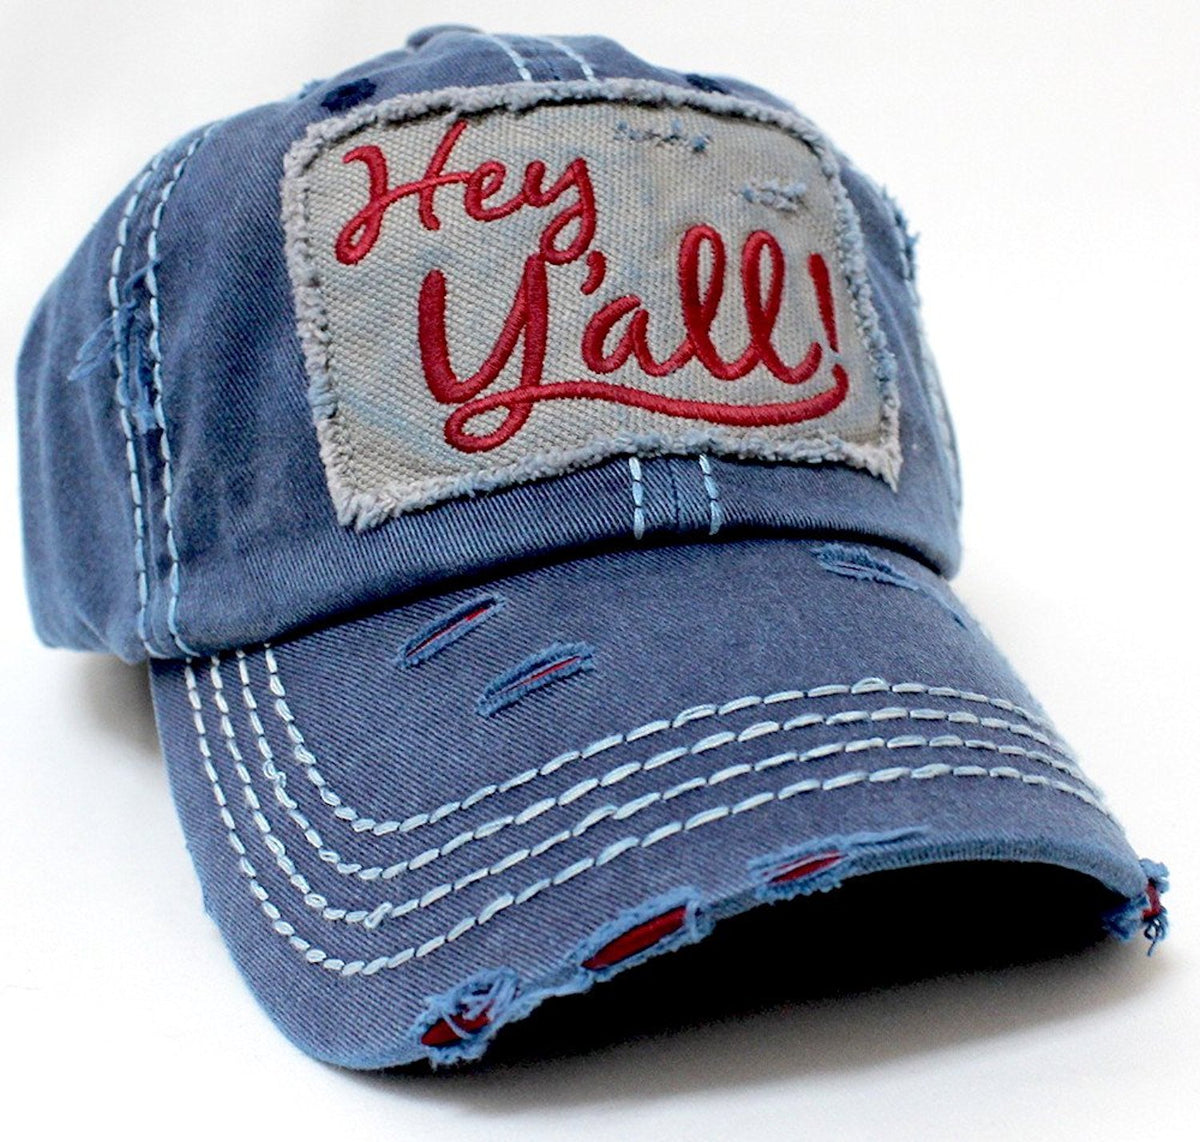 NEW!! Washed NAVY/Tangerine "Hey Y'all!" Patch Embroidery Baseball Hat - Caps 'N Vintage 